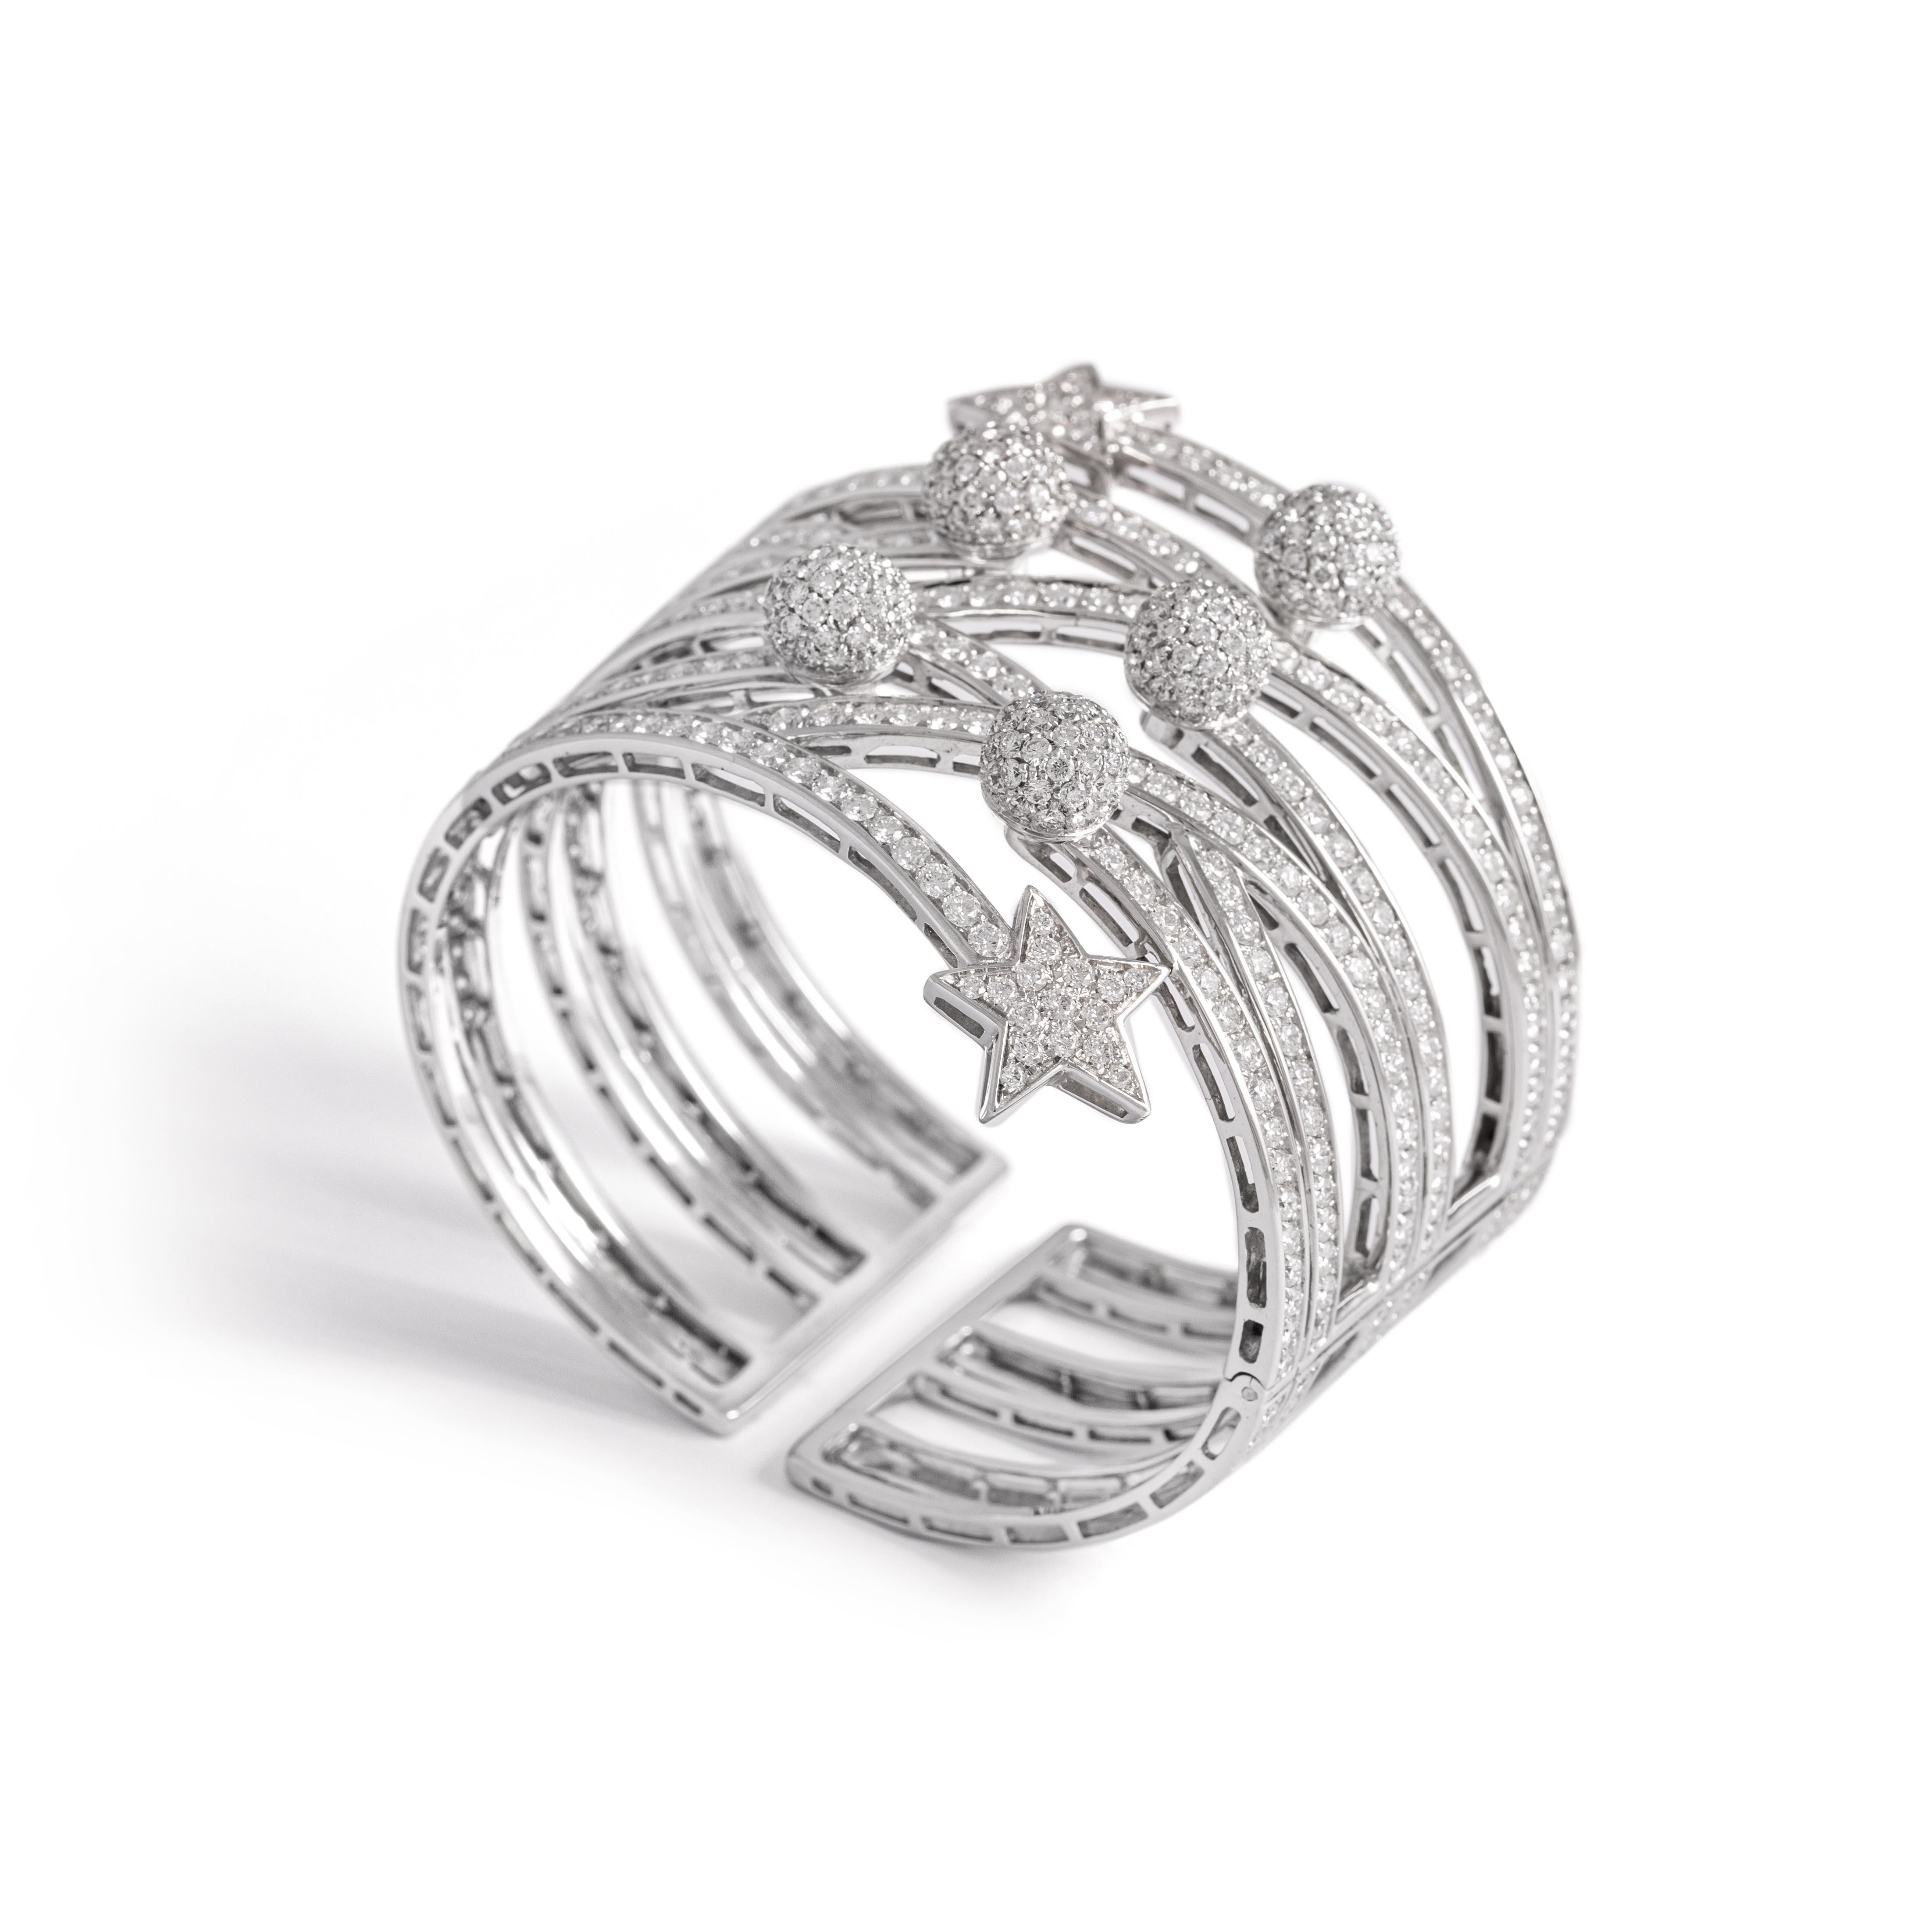 Bangle in 18kt white gold set with 546 diamonds 16.99 cts

Inner circumference: Approximately 17.42 centimeters ( 6.86 inches)

Total weight: 94.68 grams.

Width on the top: 5.20 centimeters ( 2.05 inches).

